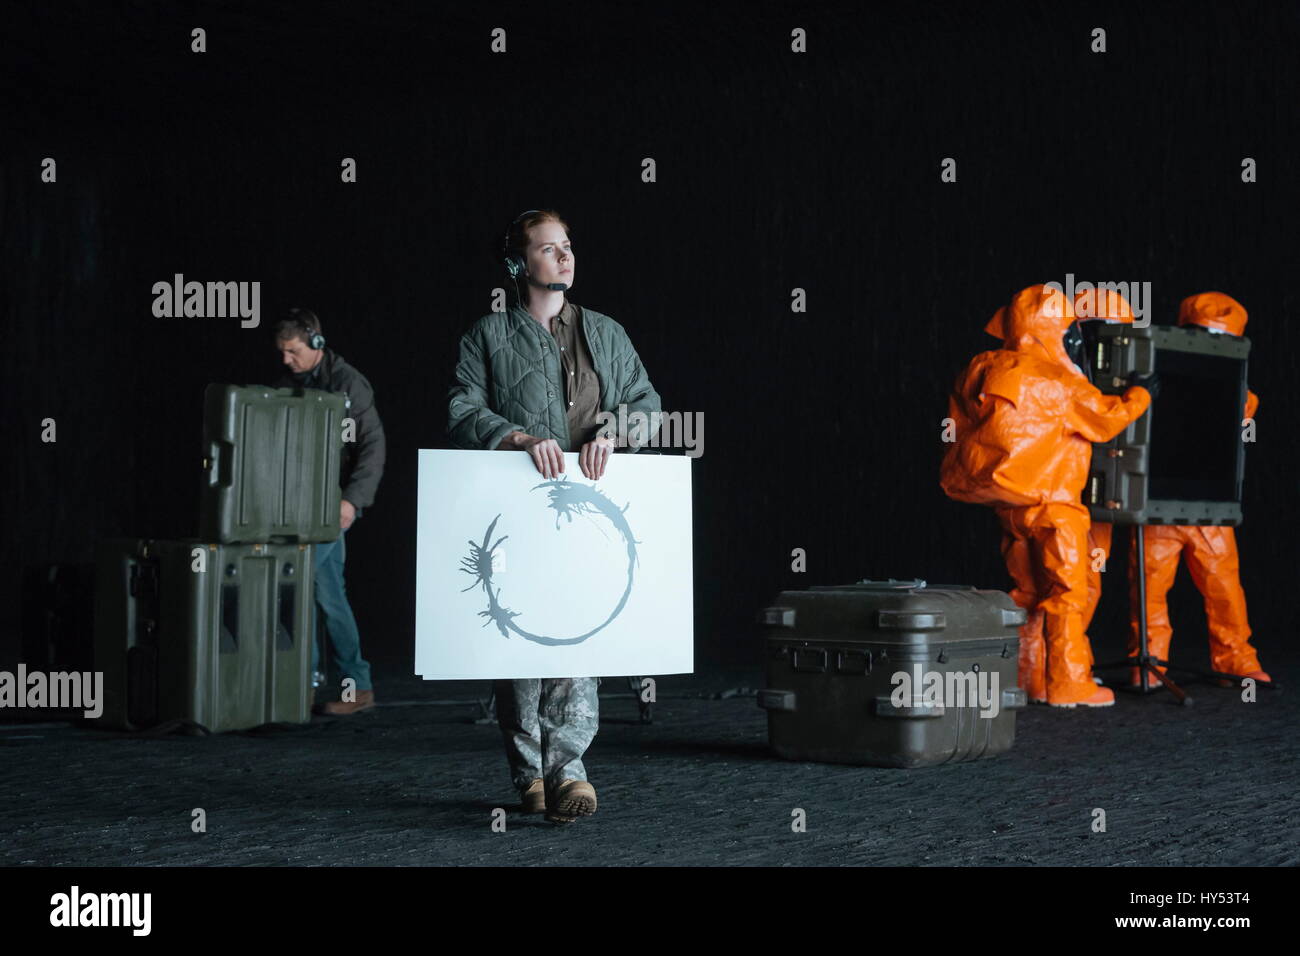 RELEASE DATE: November 11, 2016 TITLE: Arrival STUDIO: Paramount Pictures DIRECTOR: Denis Villeneuve PLOT: A linguist is recruited by the military to assist in translating alien communications STARRING: Jeremy Renner as Ian Donnelly and Amy Adams as Louise Banks. (Credit Image: © Paramount Pictures/Entertainment Pictures) Stock Photo